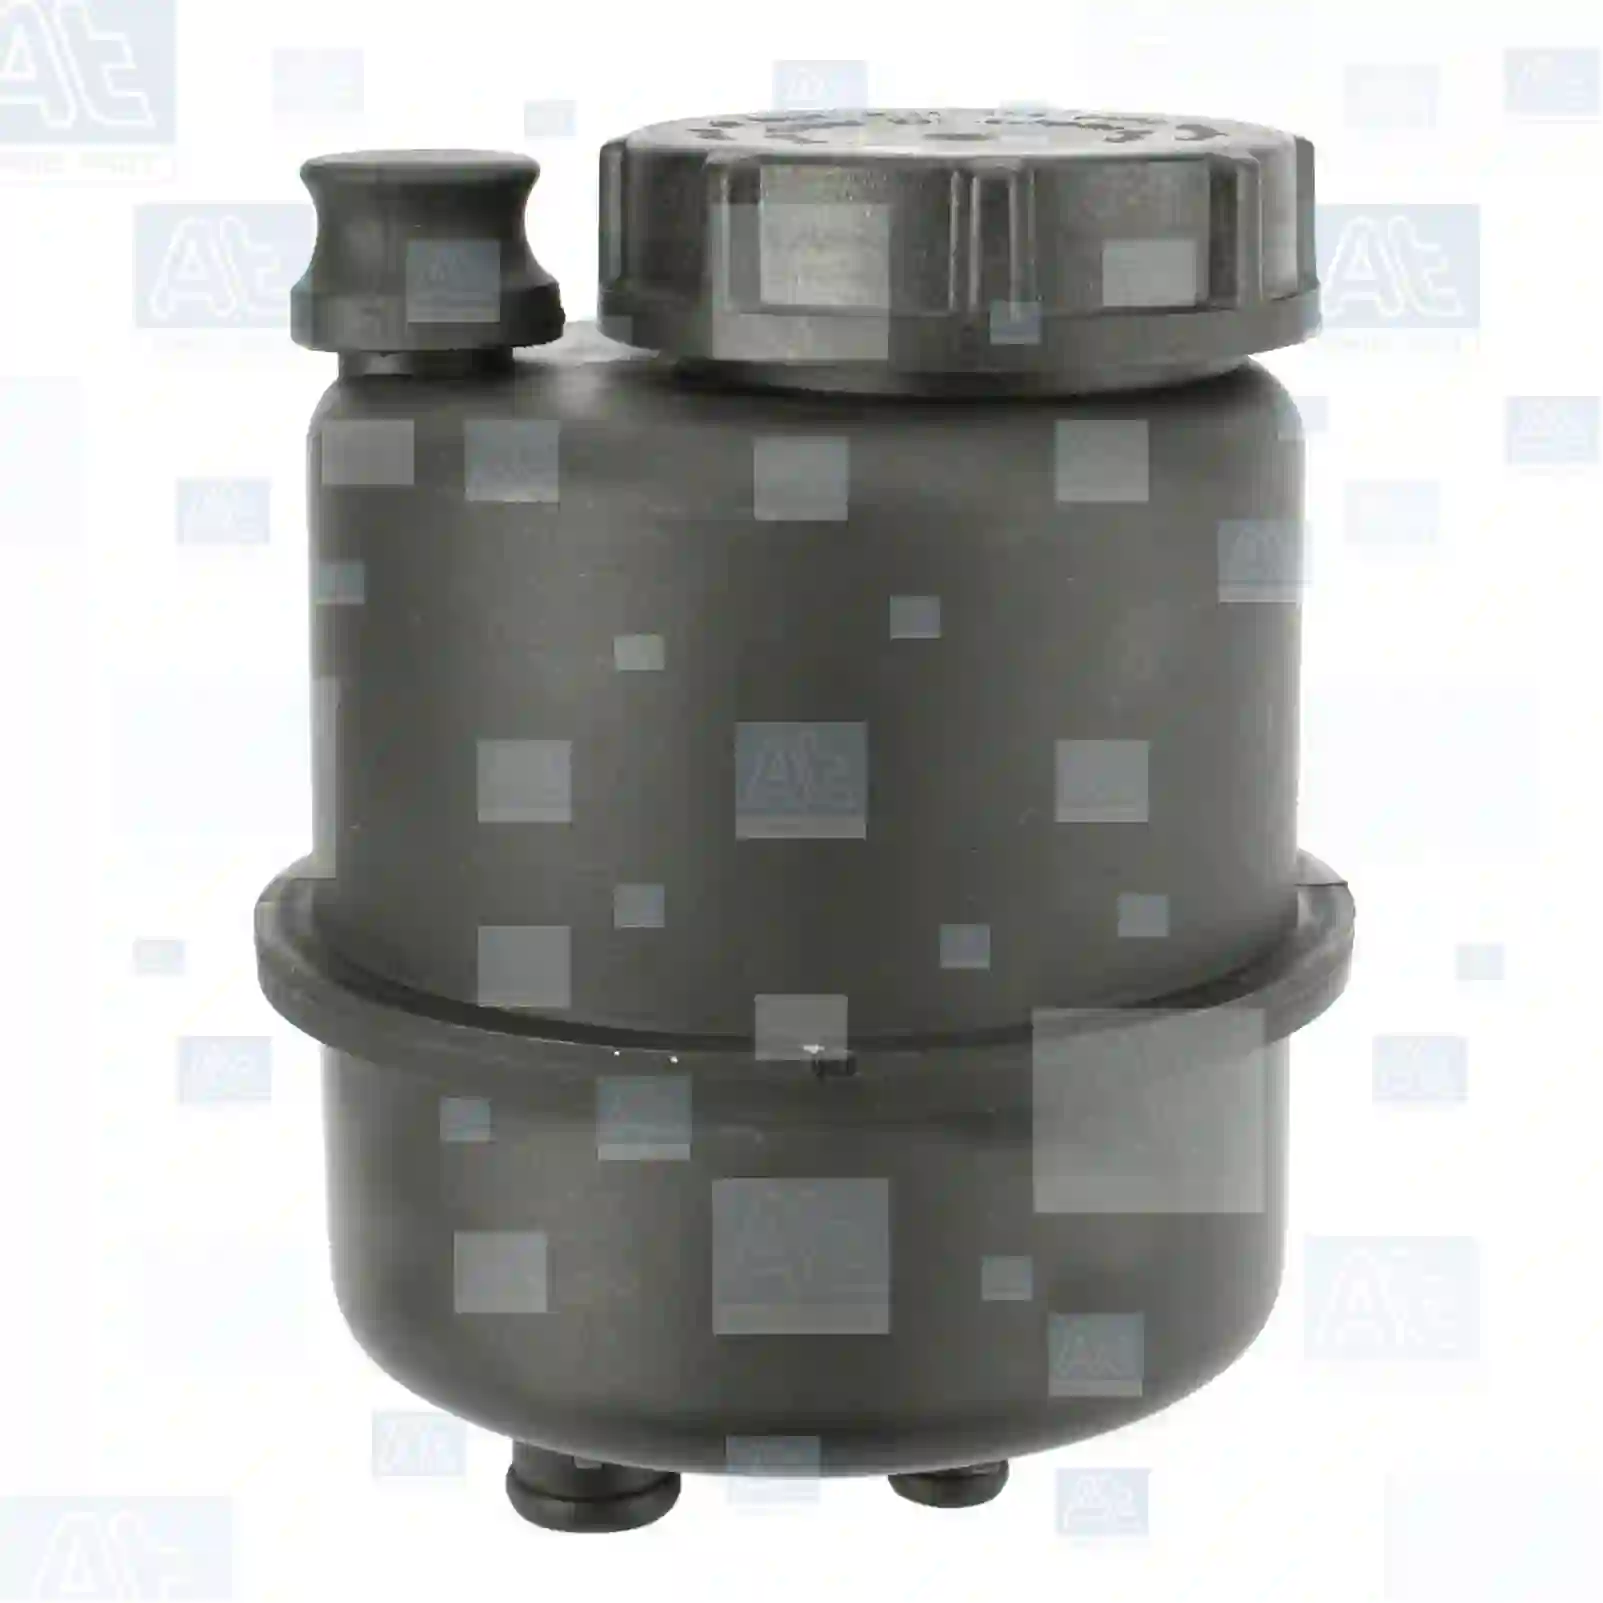 Oil container, with filter, 77705225, 0274965, 274965, RAK3233, 655644, 1017435, 3600254000, 42548853, 61585775, 93193415, 93805623, 81473016030, 85400003315, N1011019621, 0004663802, 0004664502, 0004665502, 0004666202, 49180-D8800, RAK3233, 5000791018, 7401592945, 1327382, 297353, 318533, 524094, 40070, 1794020171, 1794120900, J1794020171, 281473016030, 20210531, 274965, 1592945, ZG03042-0008 ||  77705225 At Spare Part | Engine, Accelerator Pedal, Camshaft, Connecting Rod, Crankcase, Crankshaft, Cylinder Head, Engine Suspension Mountings, Exhaust Manifold, Exhaust Gas Recirculation, Filter Kits, Flywheel Housing, General Overhaul Kits, Engine, Intake Manifold, Oil Cleaner, Oil Cooler, Oil Filter, Oil Pump, Oil Sump, Piston & Liner, Sensor & Switch, Timing Case, Turbocharger, Cooling System, Belt Tensioner, Coolant Filter, Coolant Pipe, Corrosion Prevention Agent, Drive, Expansion Tank, Fan, Intercooler, Monitors & Gauges, Radiator, Thermostat, V-Belt / Timing belt, Water Pump, Fuel System, Electronical Injector Unit, Feed Pump, Fuel Filter, cpl., Fuel Gauge Sender,  Fuel Line, Fuel Pump, Fuel Tank, Injection Line Kit, Injection Pump, Exhaust System, Clutch & Pedal, Gearbox, Propeller Shaft, Axles, Brake System, Hubs & Wheels, Suspension, Leaf Spring, Universal Parts / Accessories, Steering, Electrical System, Cabin Oil container, with filter, 77705225, 0274965, 274965, RAK3233, 655644, 1017435, 3600254000, 42548853, 61585775, 93193415, 93805623, 81473016030, 85400003315, N1011019621, 0004663802, 0004664502, 0004665502, 0004666202, 49180-D8800, RAK3233, 5000791018, 7401592945, 1327382, 297353, 318533, 524094, 40070, 1794020171, 1794120900, J1794020171, 281473016030, 20210531, 274965, 1592945, ZG03042-0008 ||  77705225 At Spare Part | Engine, Accelerator Pedal, Camshaft, Connecting Rod, Crankcase, Crankshaft, Cylinder Head, Engine Suspension Mountings, Exhaust Manifold, Exhaust Gas Recirculation, Filter Kits, Flywheel Housing, General Overhaul Kits, Engine, Intake Manifold, Oil Cleaner, Oil Cooler, Oil Filter, Oil Pump, Oil Sump, Piston & Liner, Sensor & Switch, Timing Case, Turbocharger, Cooling System, Belt Tensioner, Coolant Filter, Coolant Pipe, Corrosion Prevention Agent, Drive, Expansion Tank, Fan, Intercooler, Monitors & Gauges, Radiator, Thermostat, V-Belt / Timing belt, Water Pump, Fuel System, Electronical Injector Unit, Feed Pump, Fuel Filter, cpl., Fuel Gauge Sender,  Fuel Line, Fuel Pump, Fuel Tank, Injection Line Kit, Injection Pump, Exhaust System, Clutch & Pedal, Gearbox, Propeller Shaft, Axles, Brake System, Hubs & Wheels, Suspension, Leaf Spring, Universal Parts / Accessories, Steering, Electrical System, Cabin